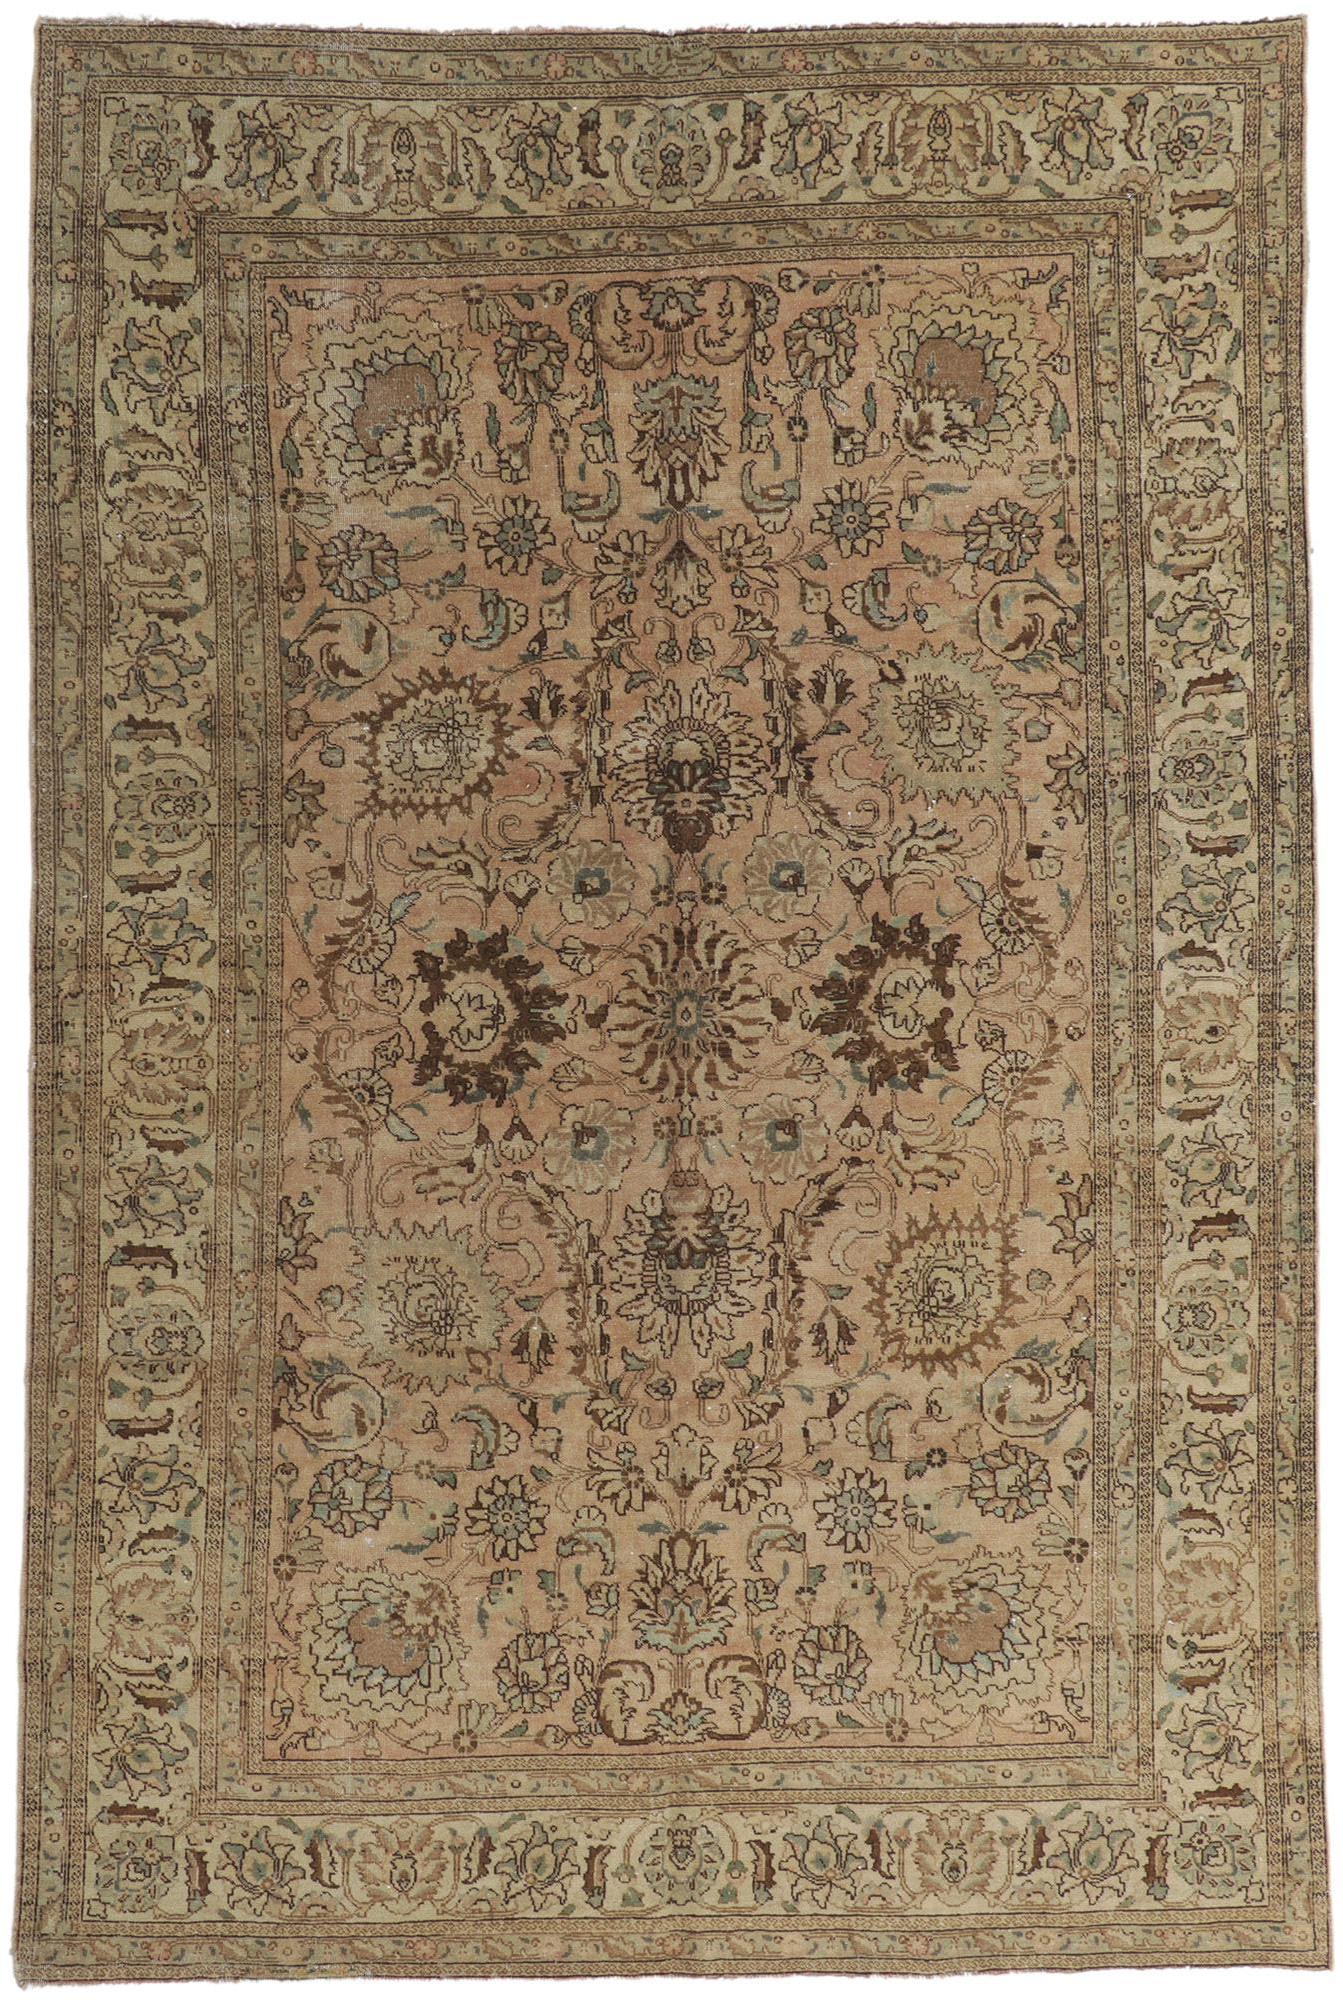 Vintage Persian Tabriz Rug with Warm Earth-Tone Colors For Sale 2